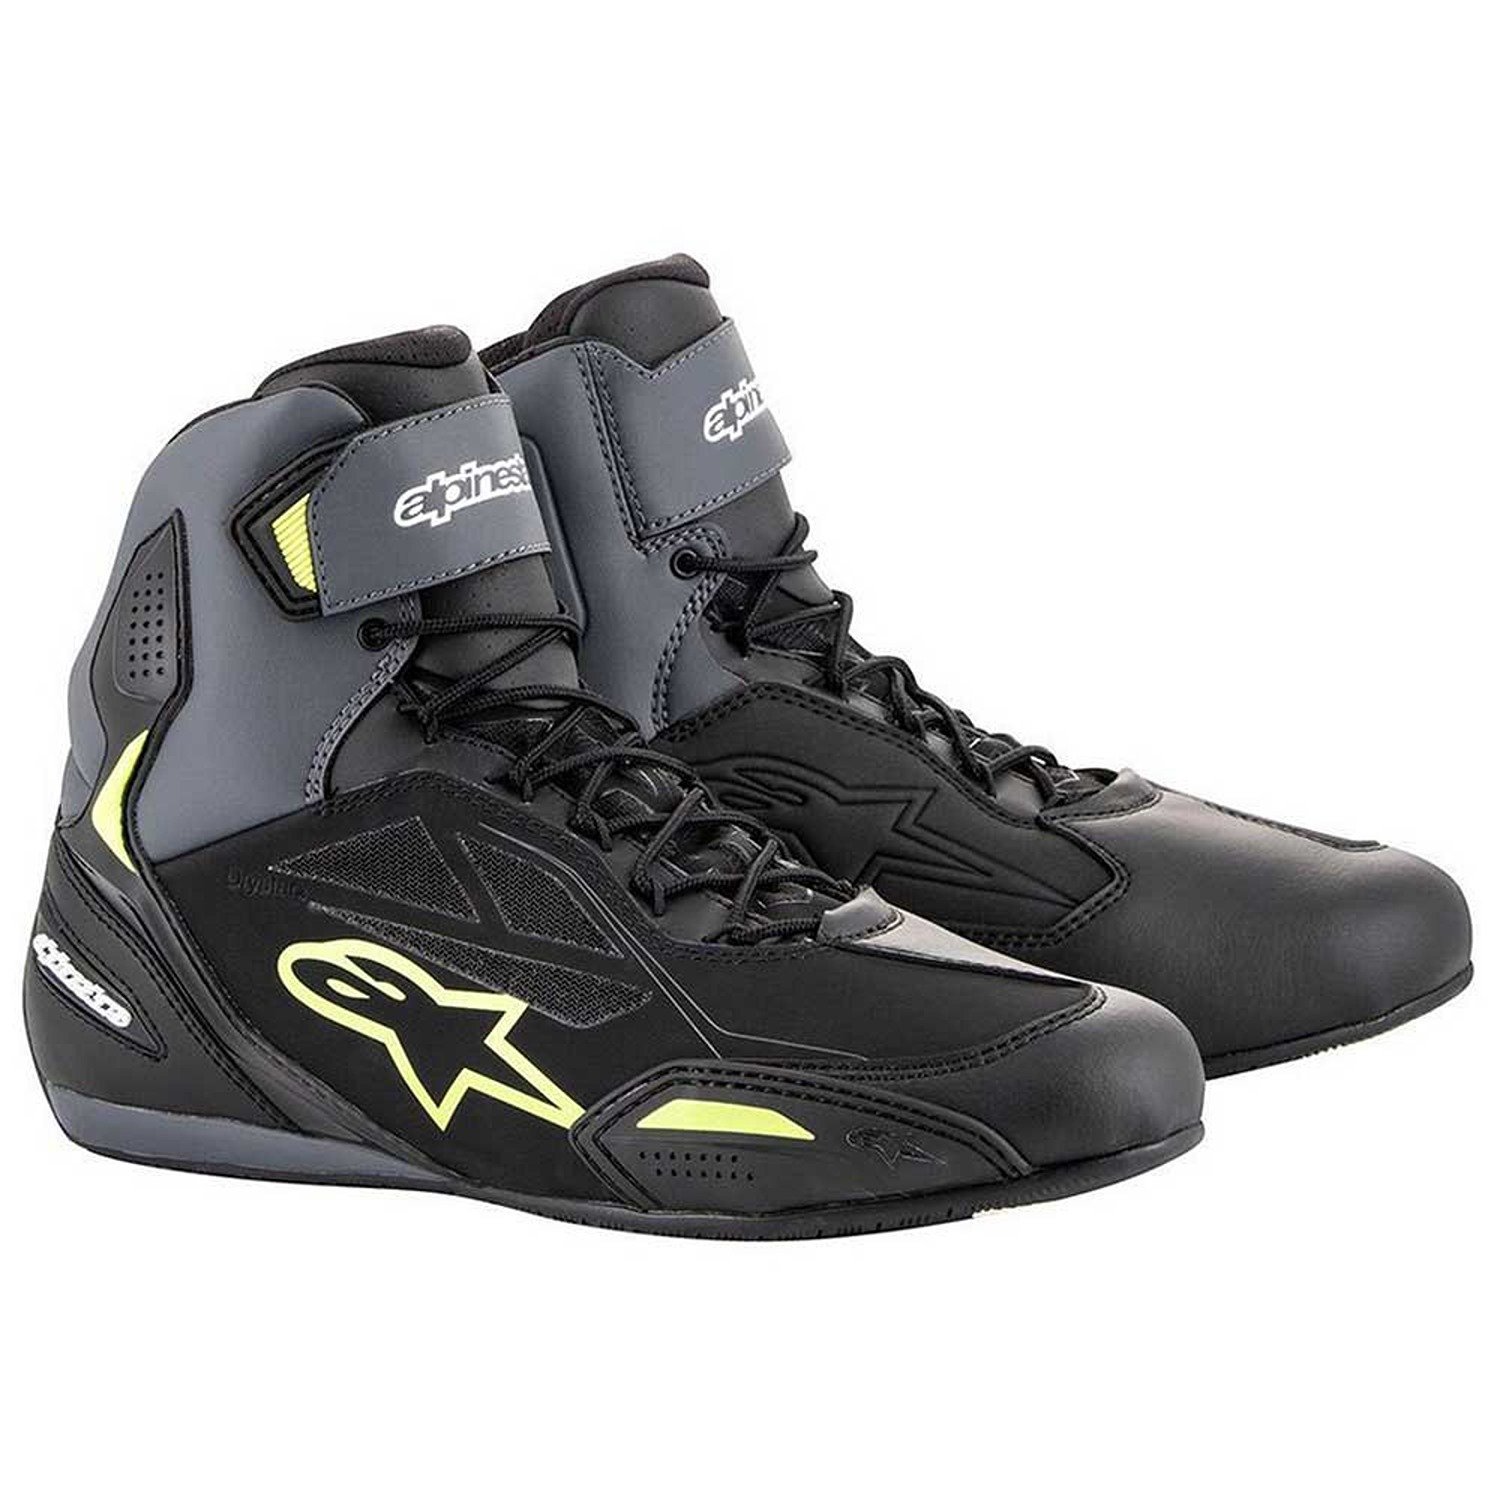 Image of EU Alpinestars Faster-3 Shoes Black Yellow Fluo Taille US 135